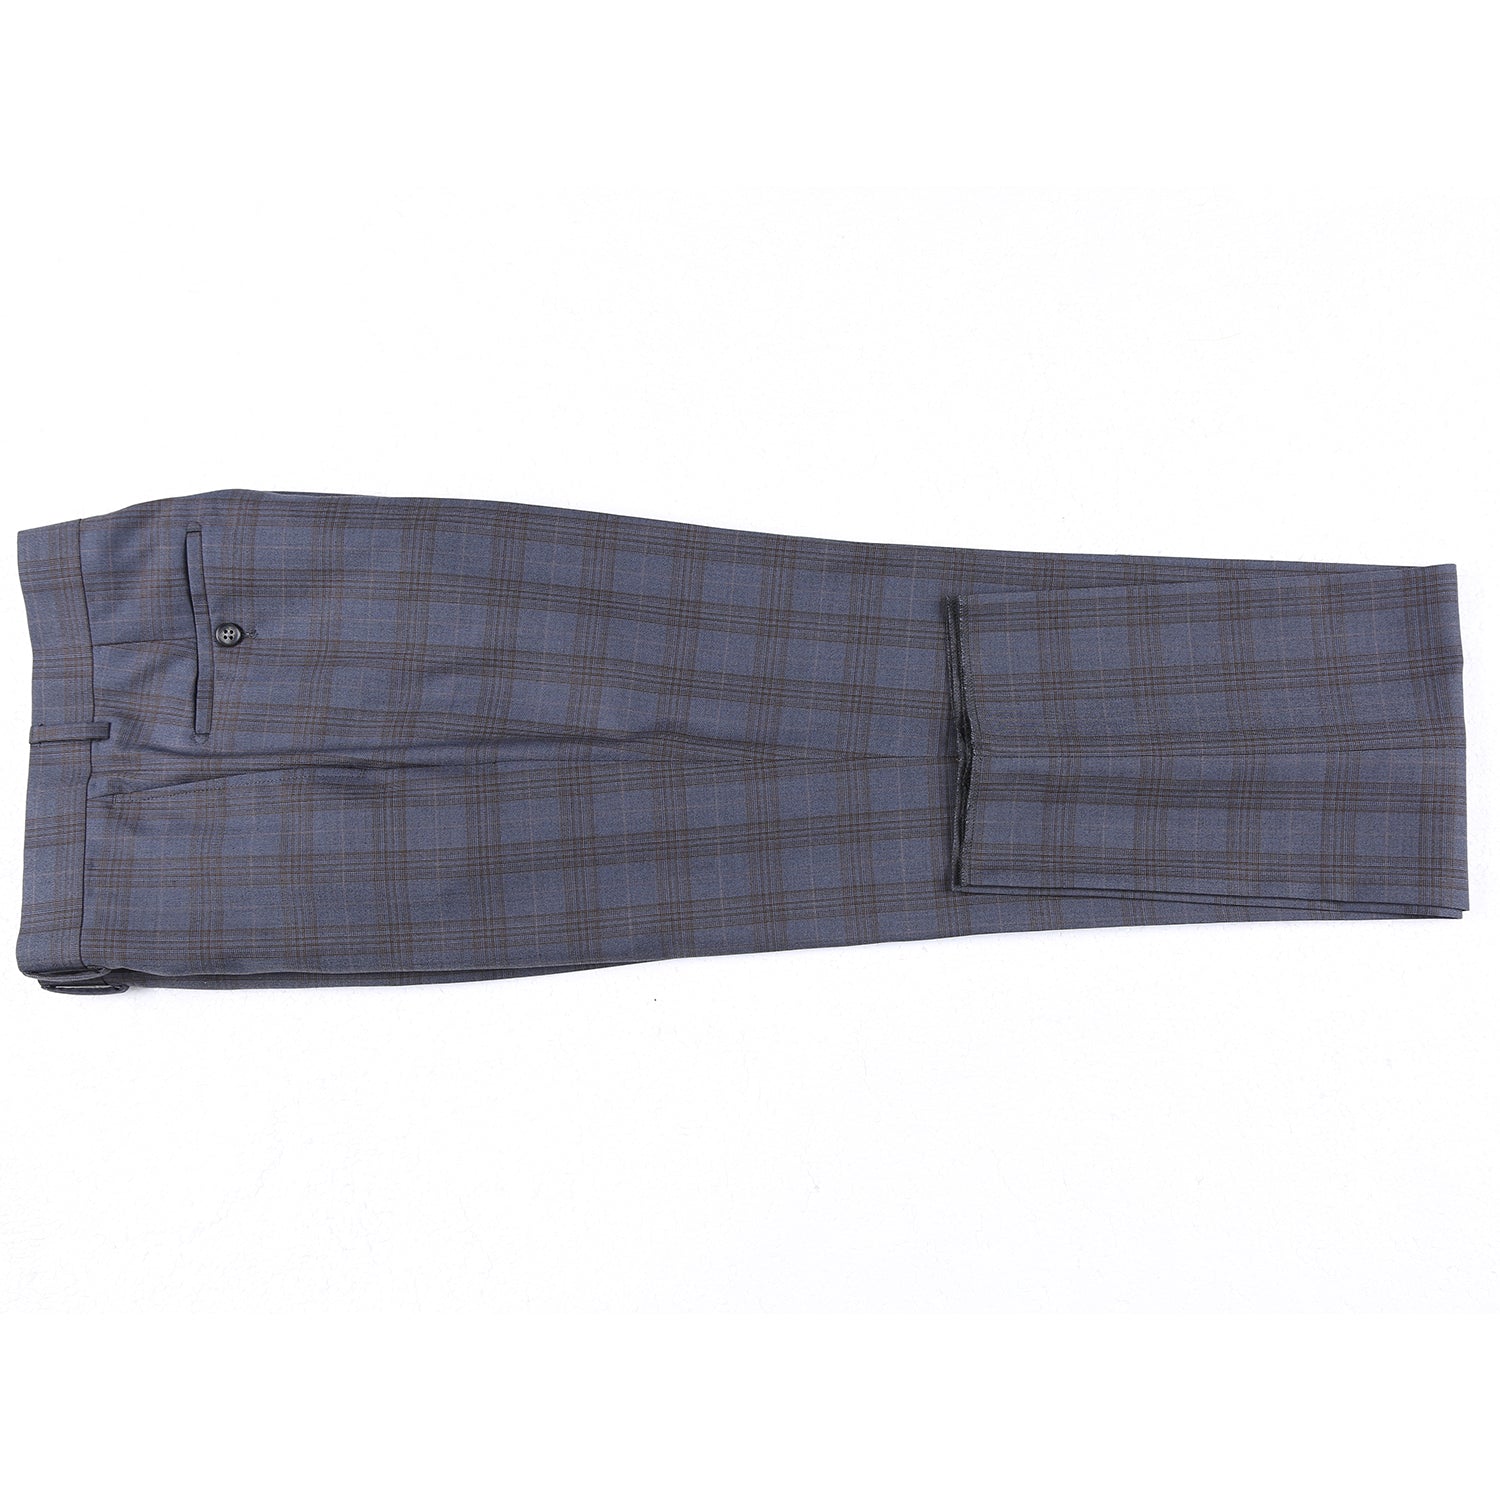 English Laundry Gray with Tan Check Notch Suit 9